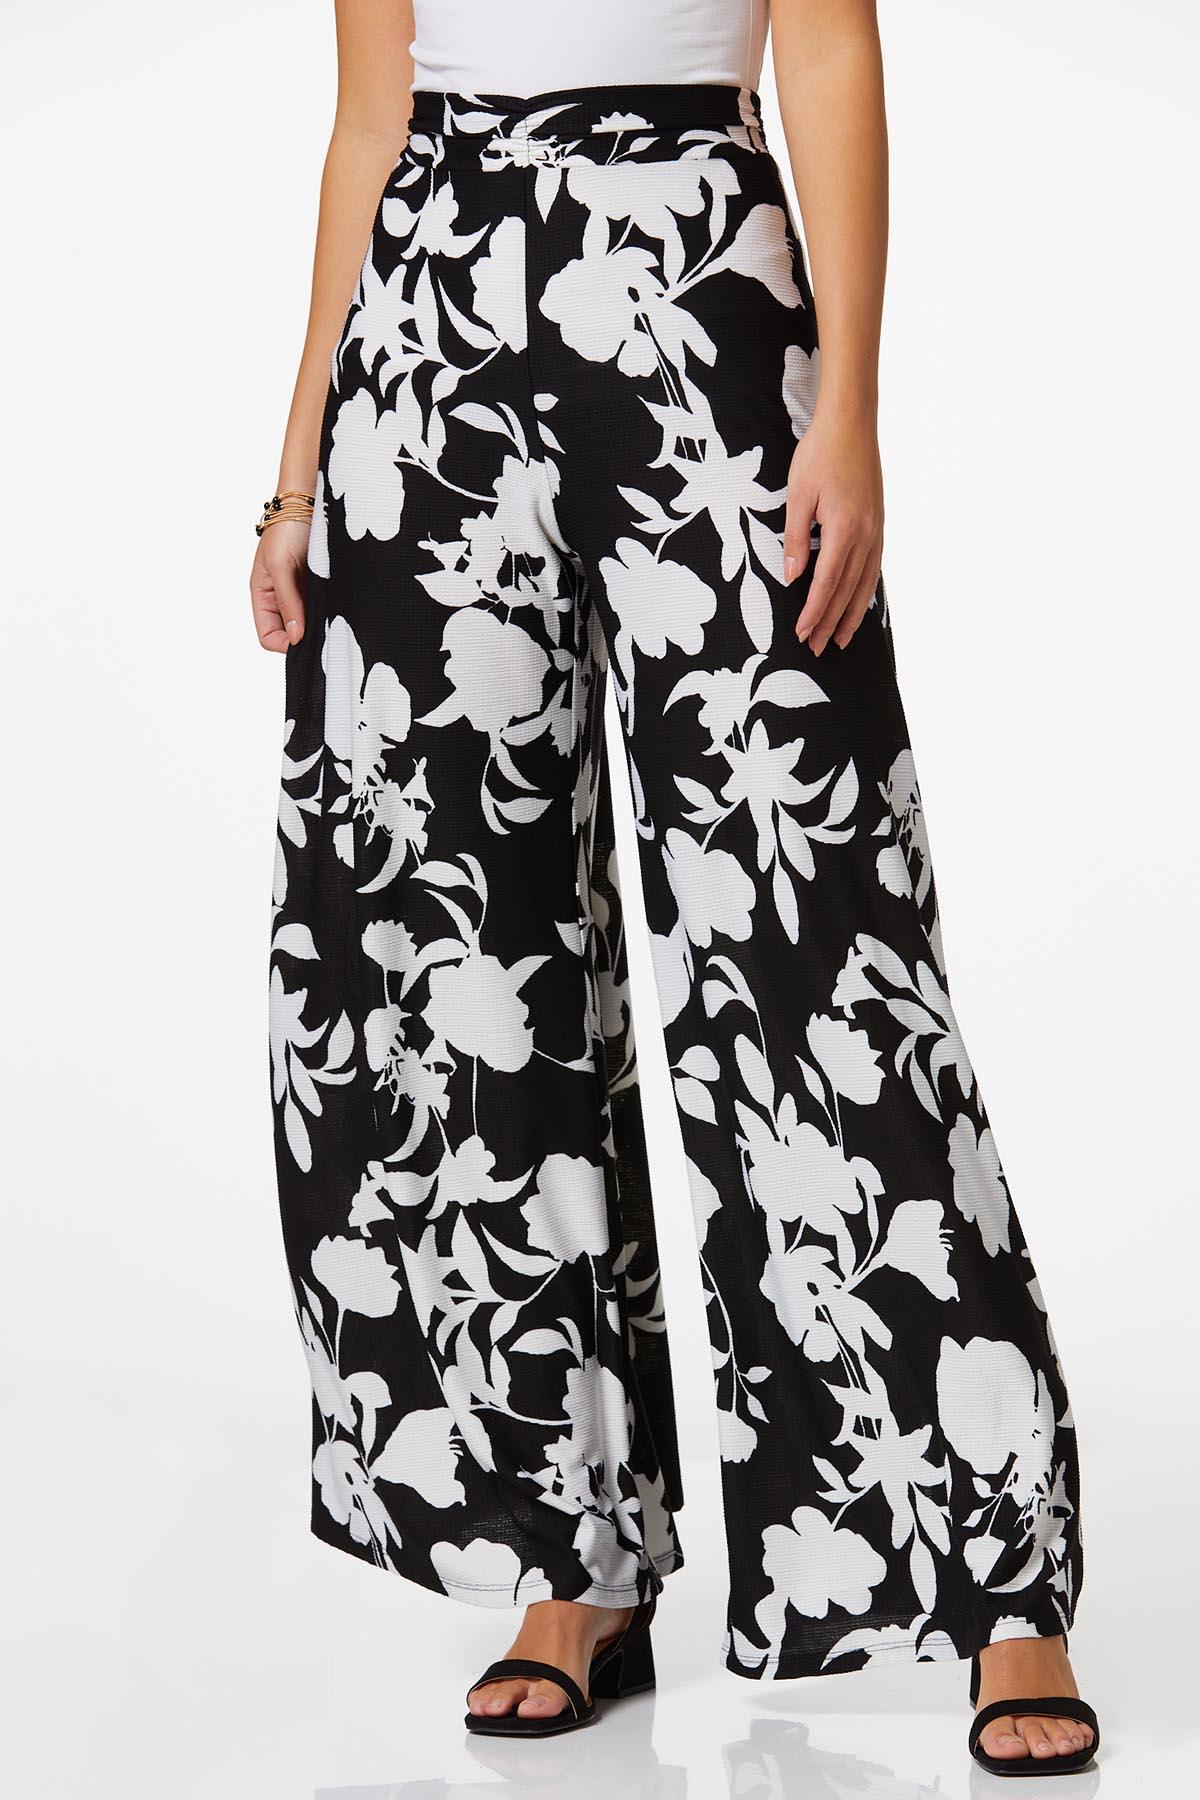 Cato Fashions  Cato Textured Floral Wide Leg Pants